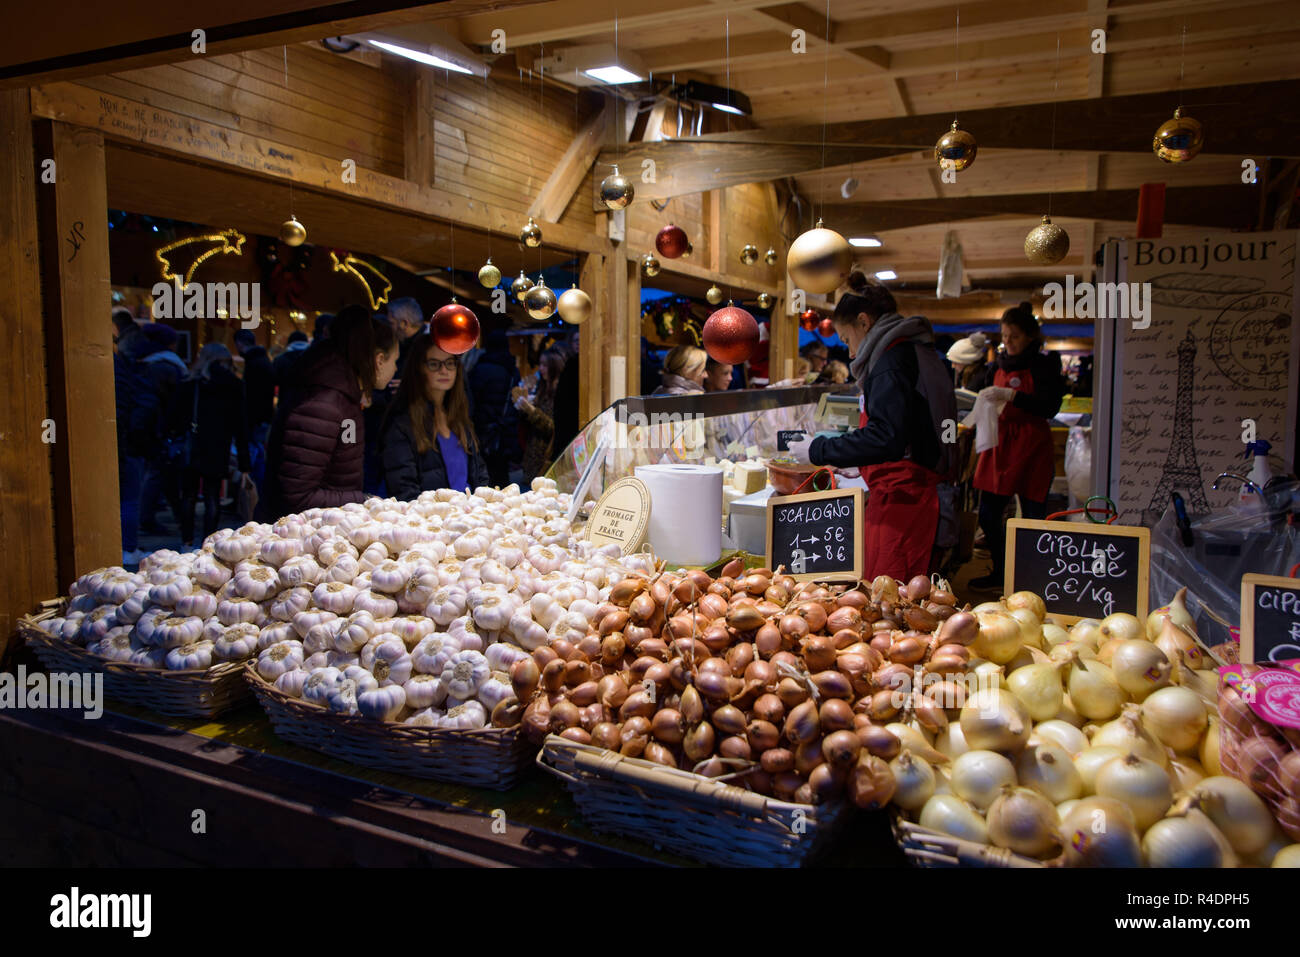 People shopping at food stalls in Christmas market in Bologna, Italy Stock Photo